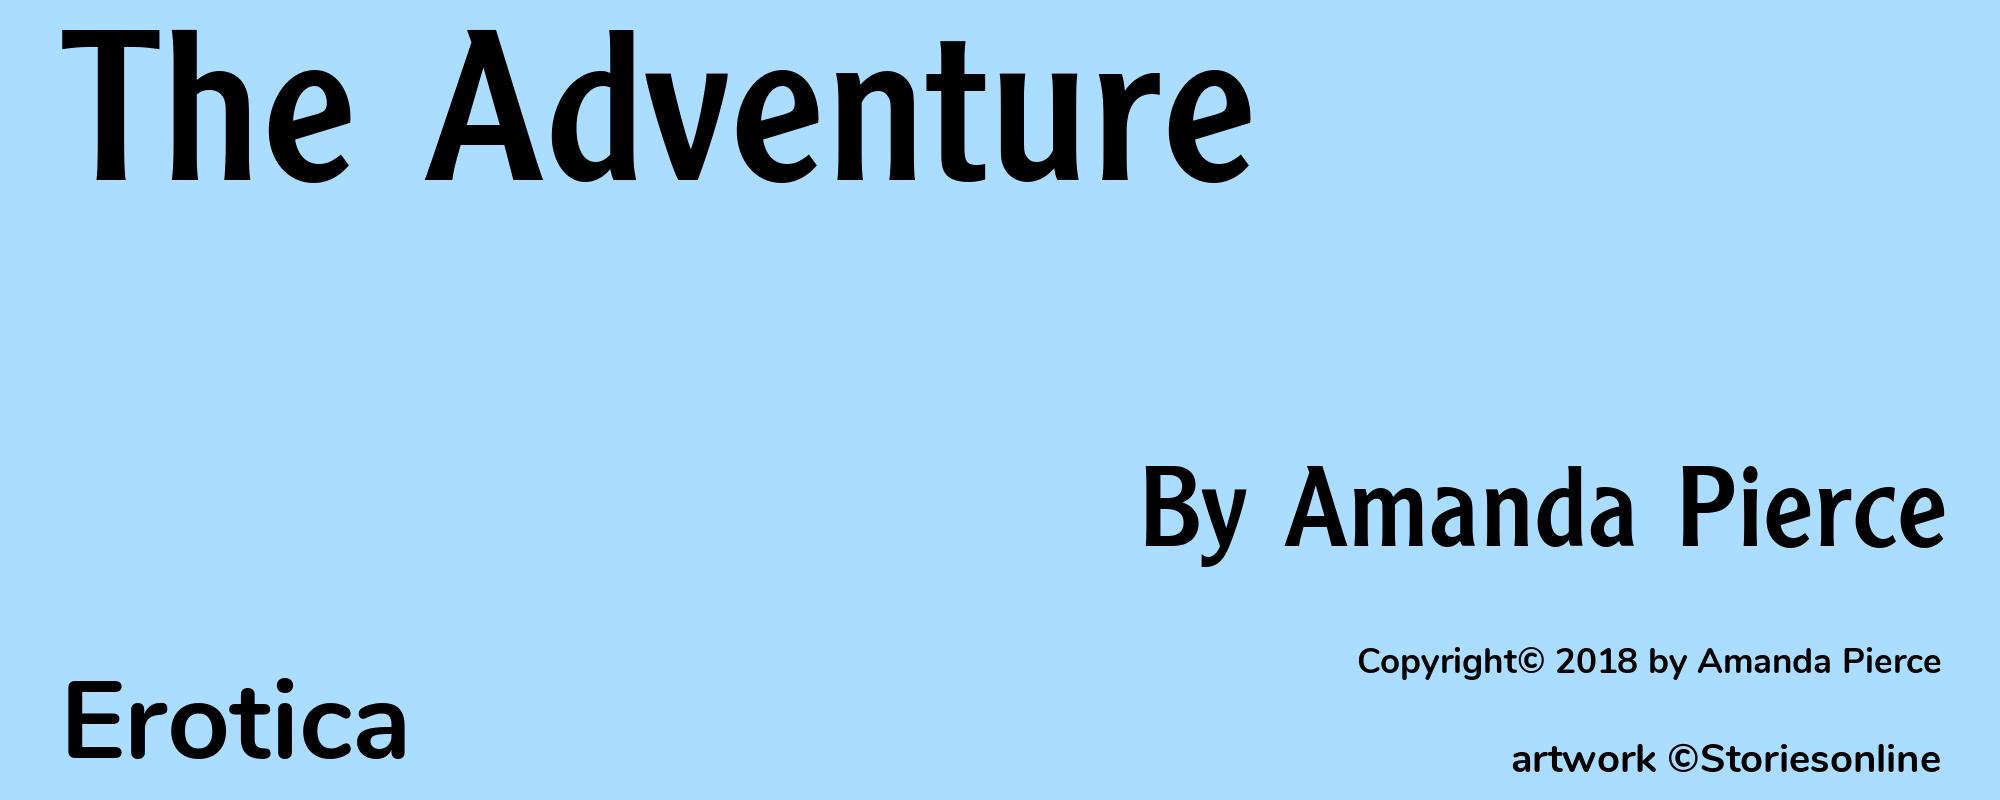 The Adventure - Cover